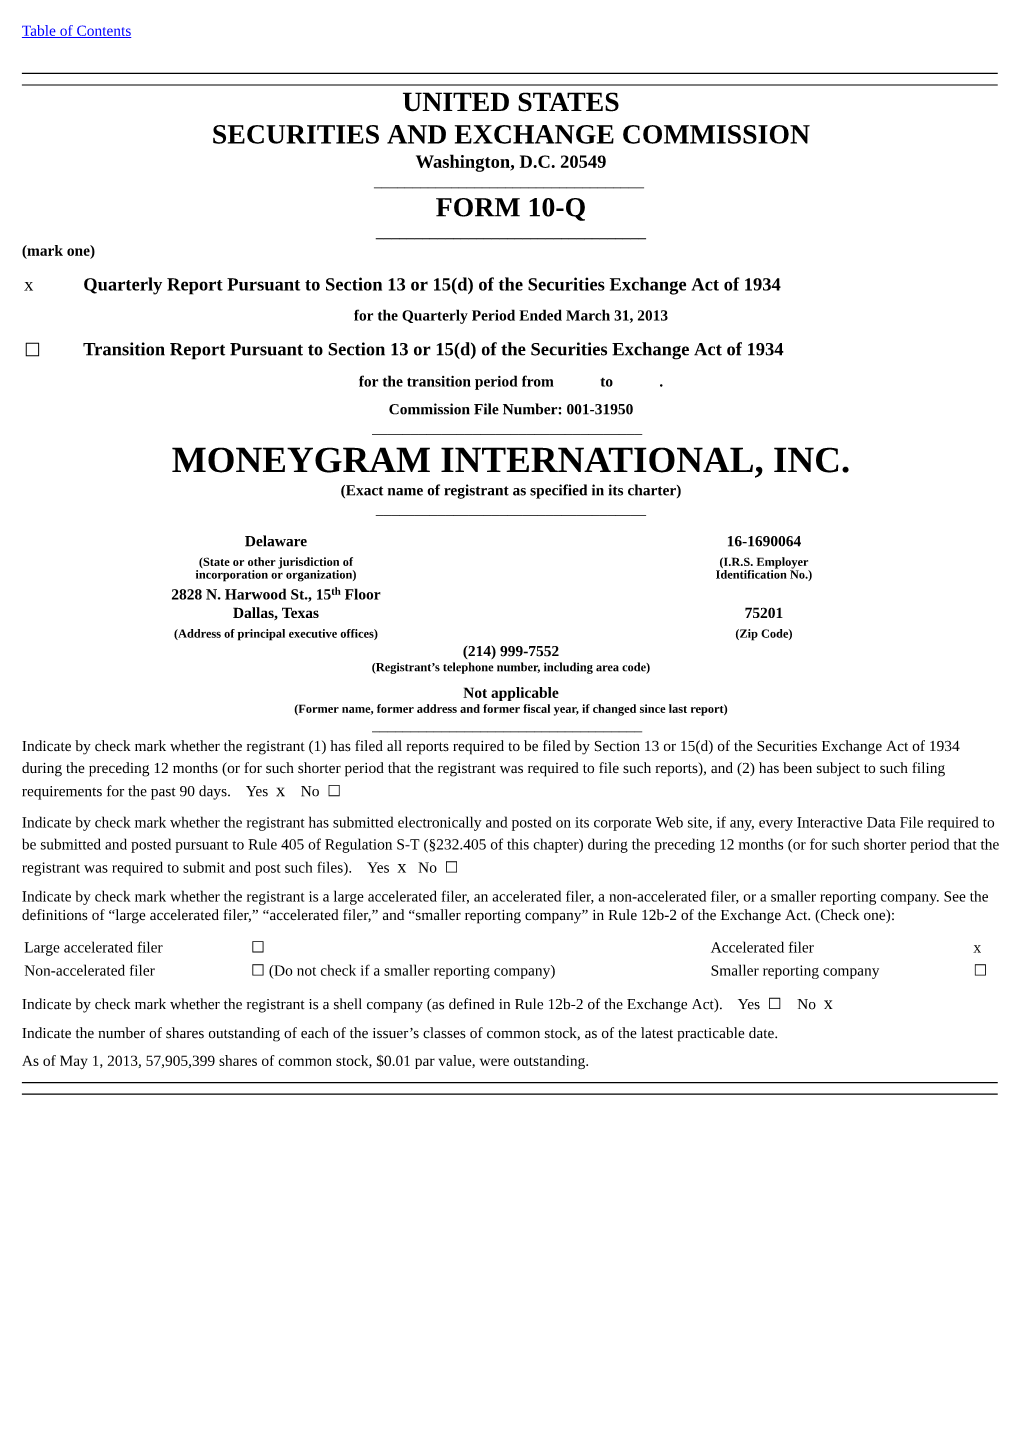 MONEYGRAM INTERNATIONAL, INC. (Exact Name of Registrant As Specified in Its Charter) ______